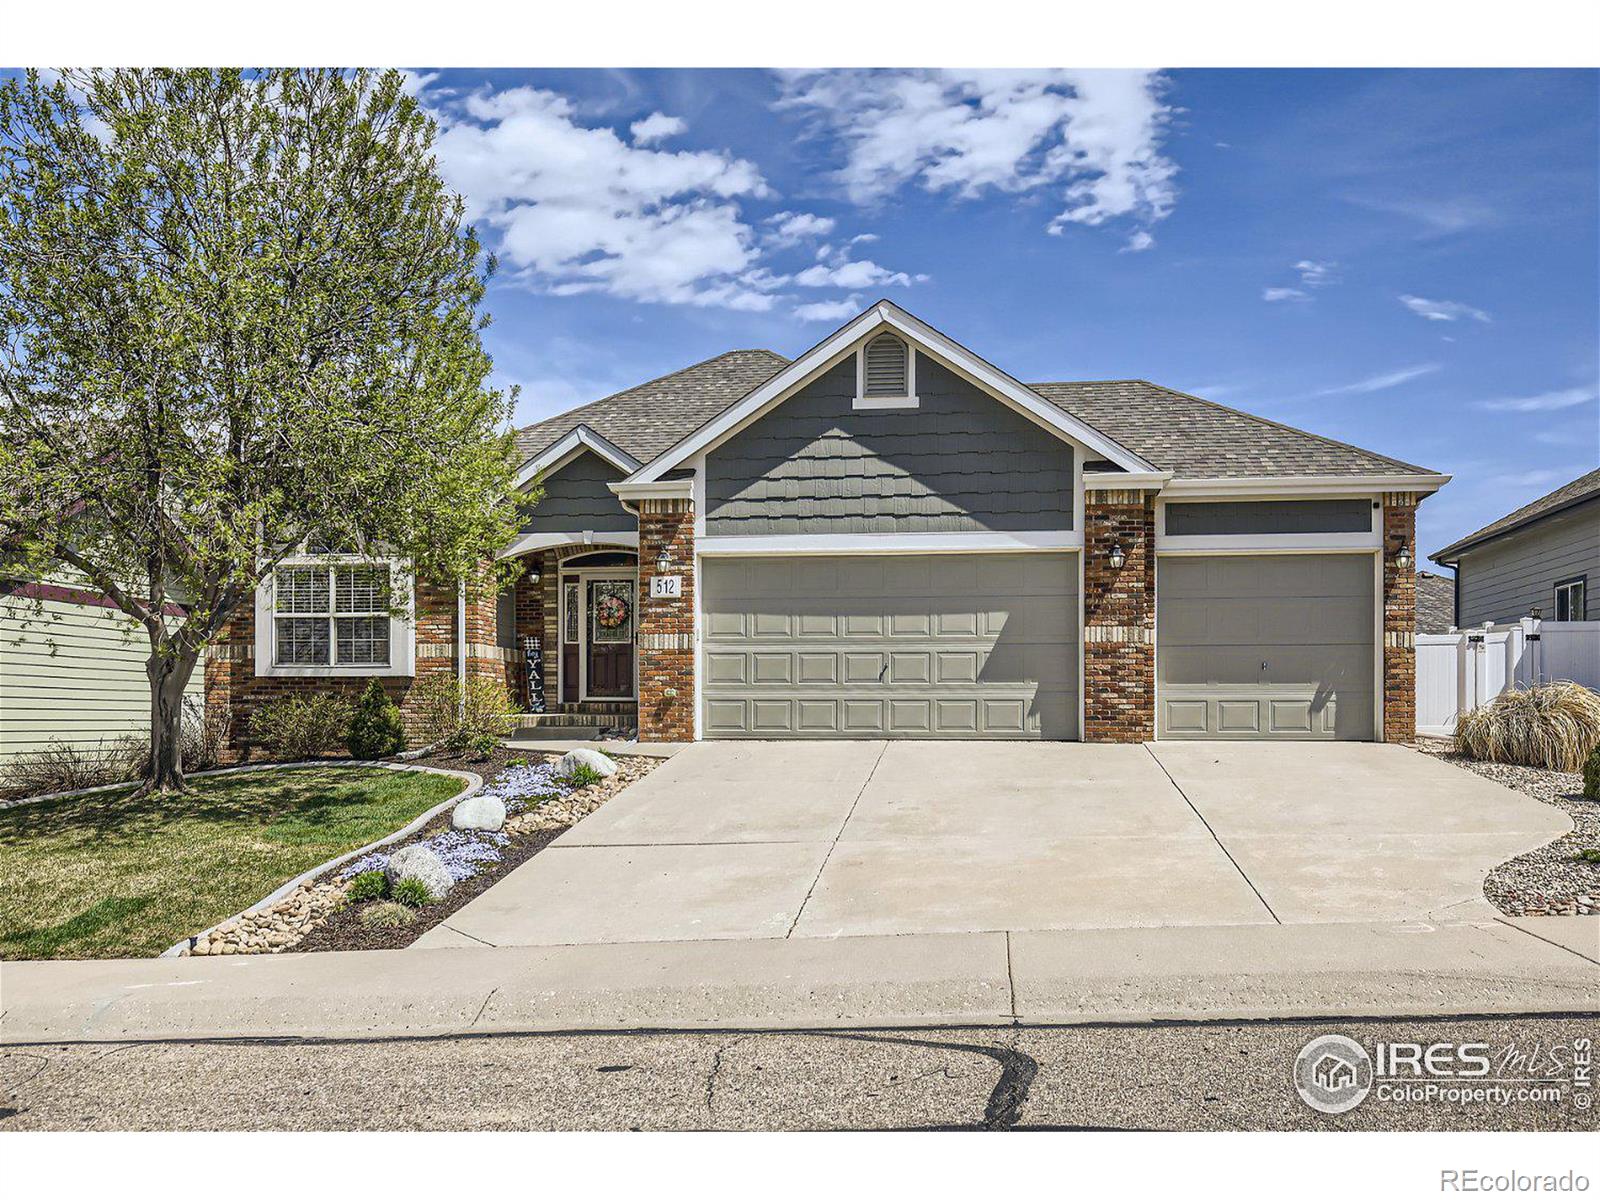 512  57th Avenue, greeley MLS: 4567891007736 Beds: 3 Baths: 2 Price: $565,000